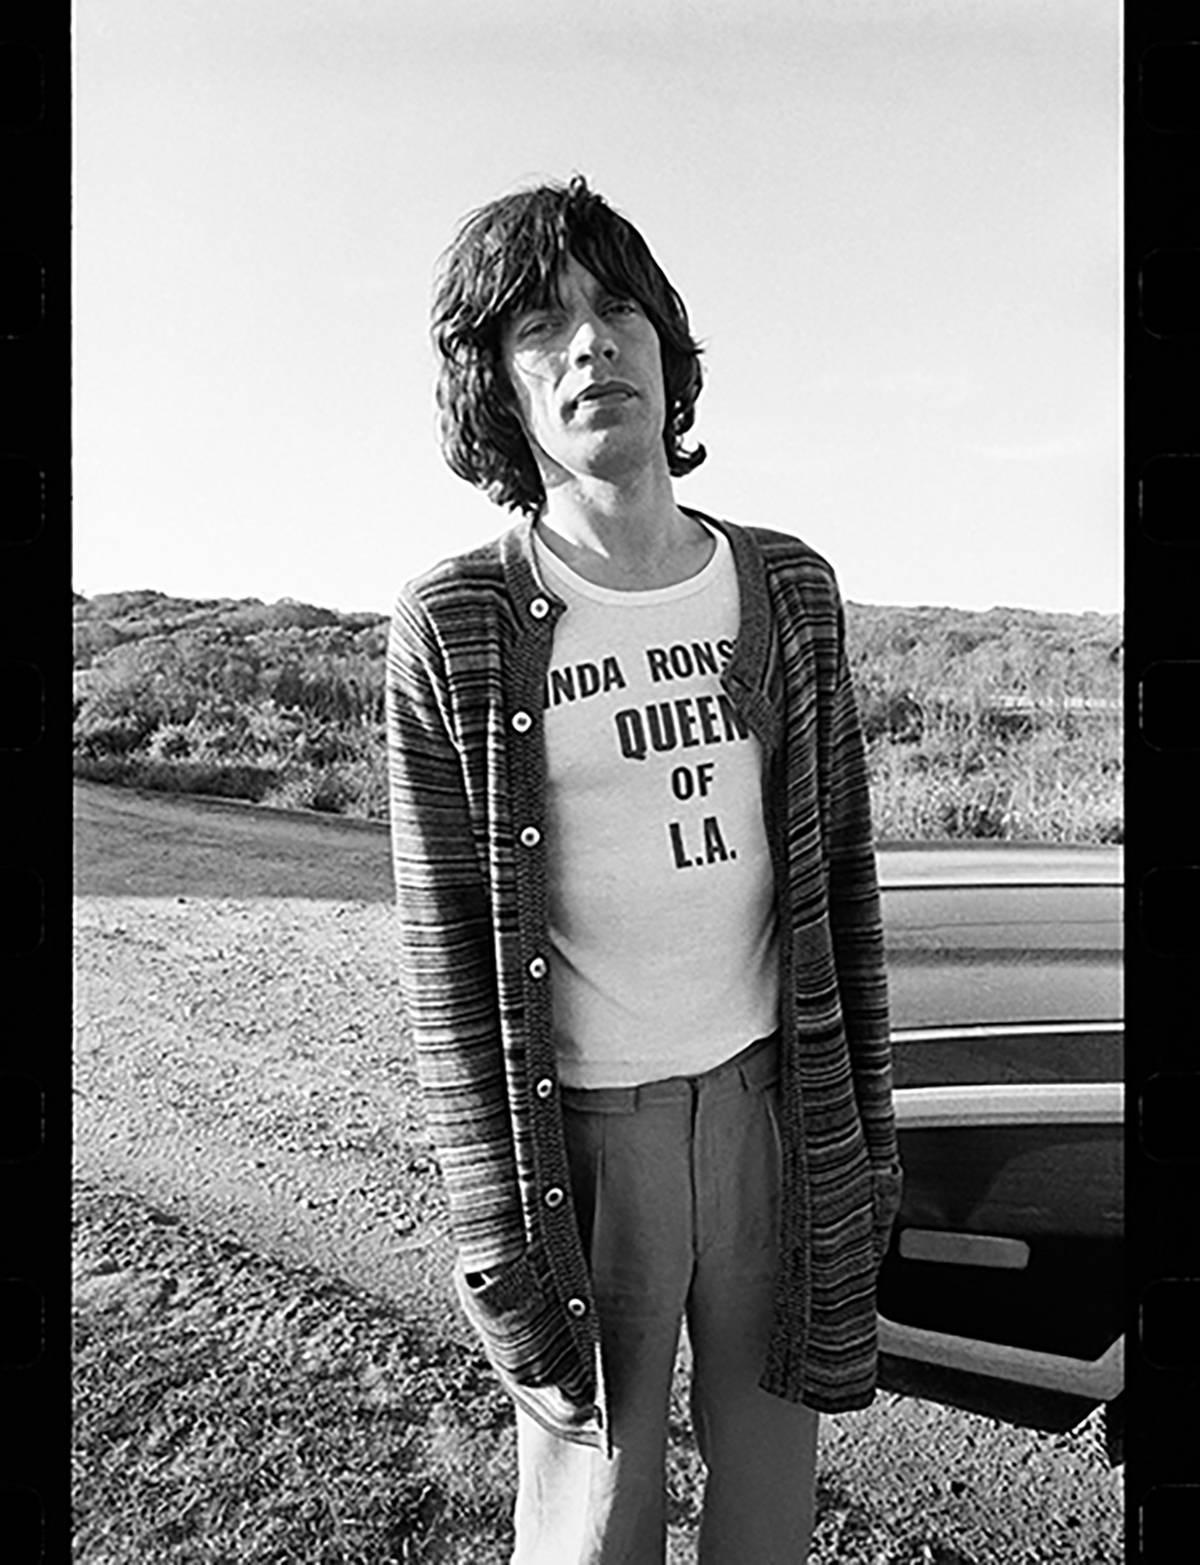 Christopher Makos Black and White Photograph - Mick Jagger (Queen of LA)